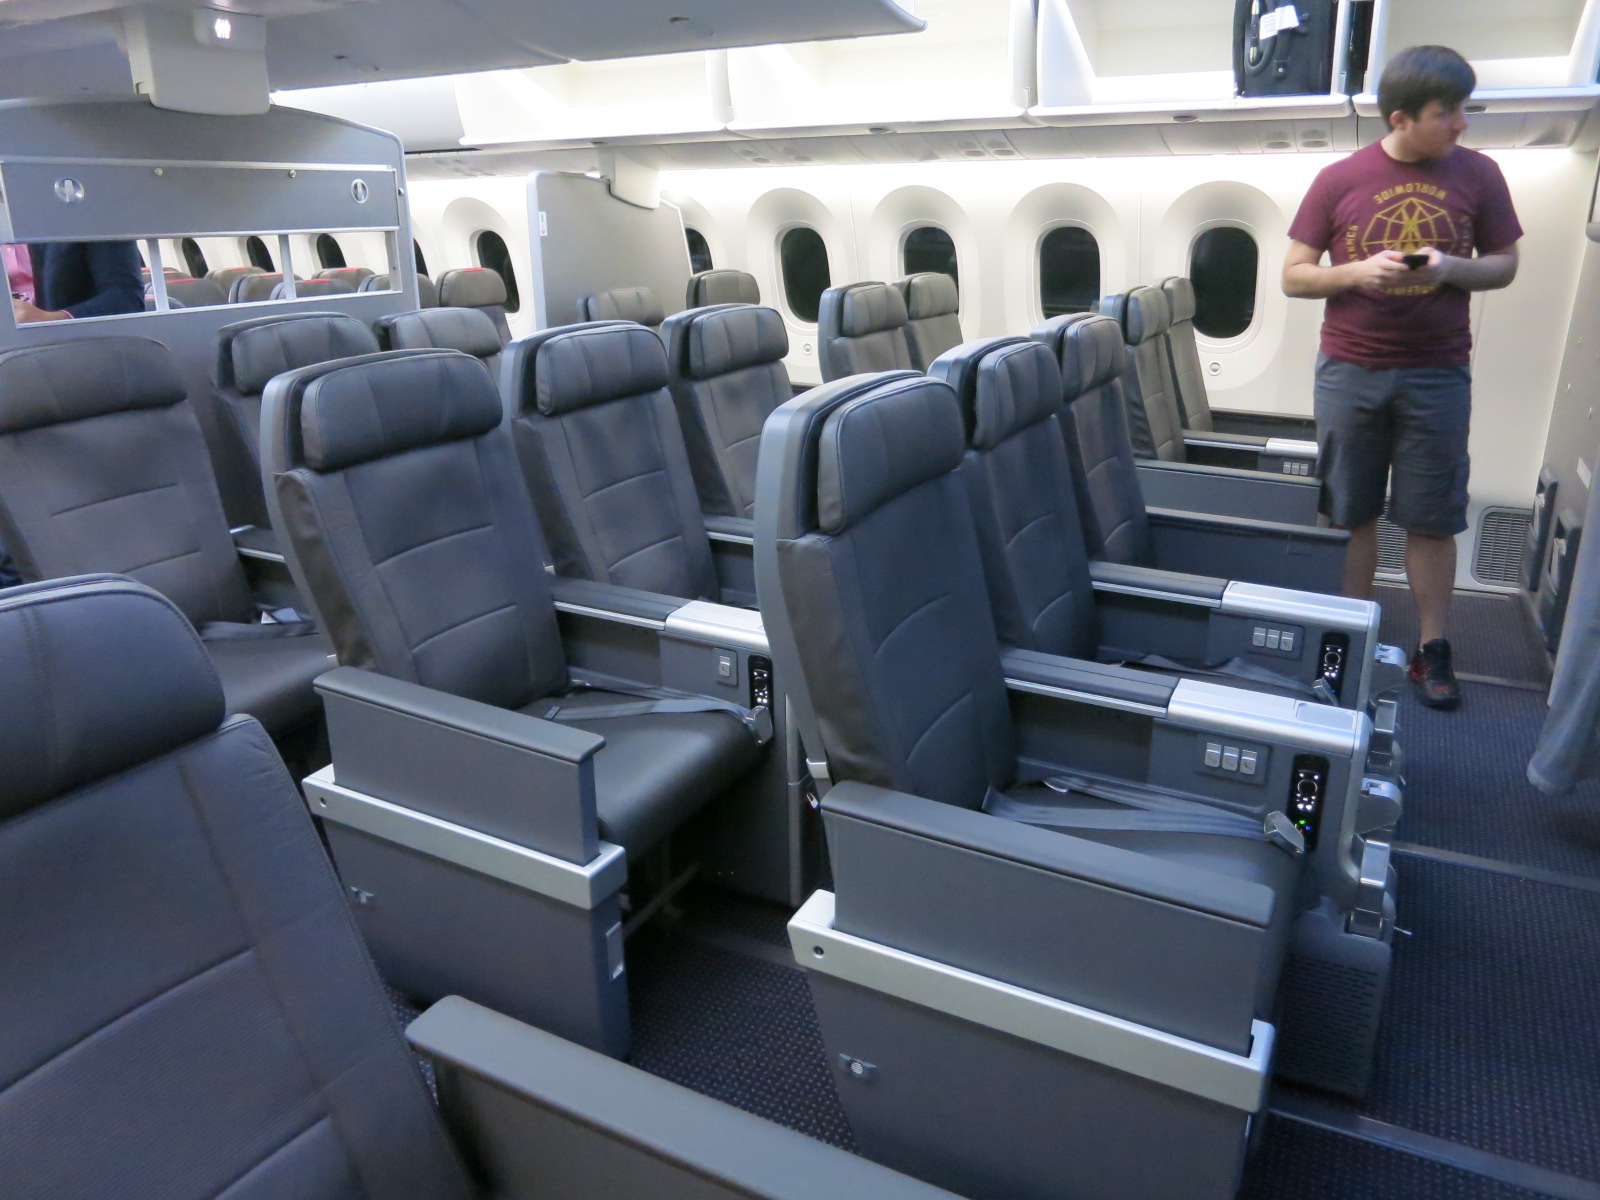 American S First Airbus A330 To Get Premium Economy Has Gone